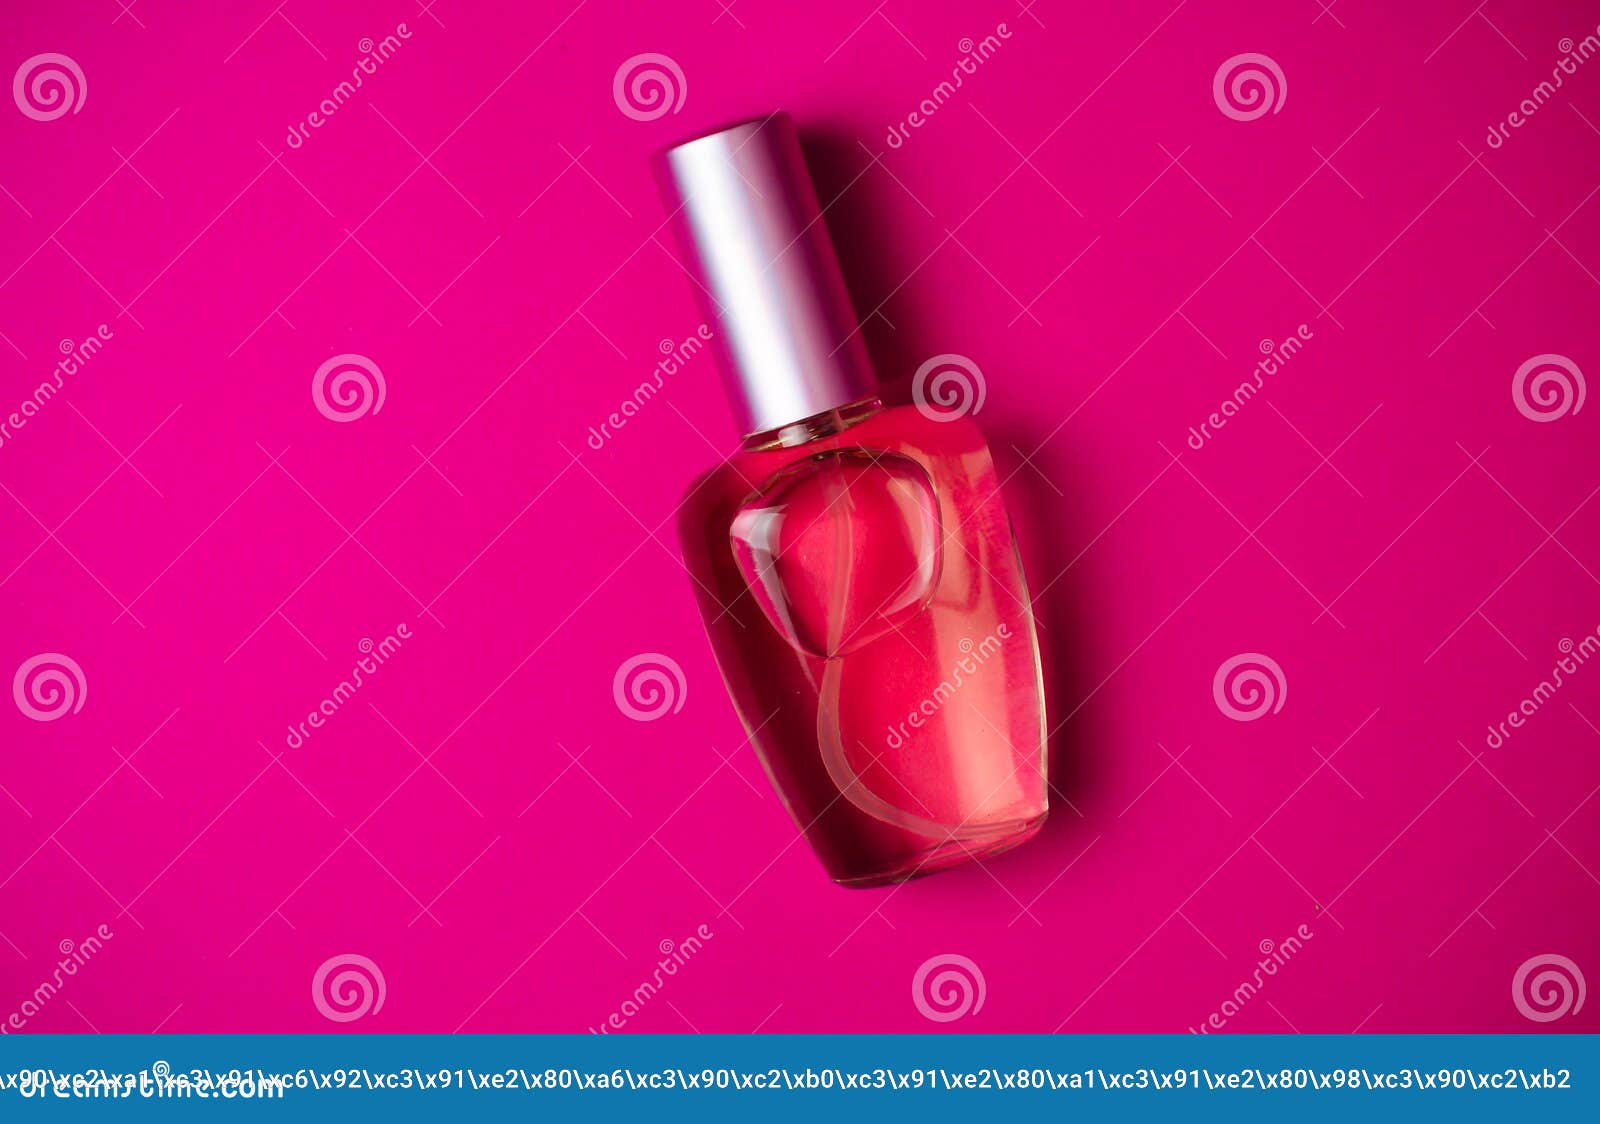 transparent bottle of female perfume on a colored pink background. top view. womenaccessories